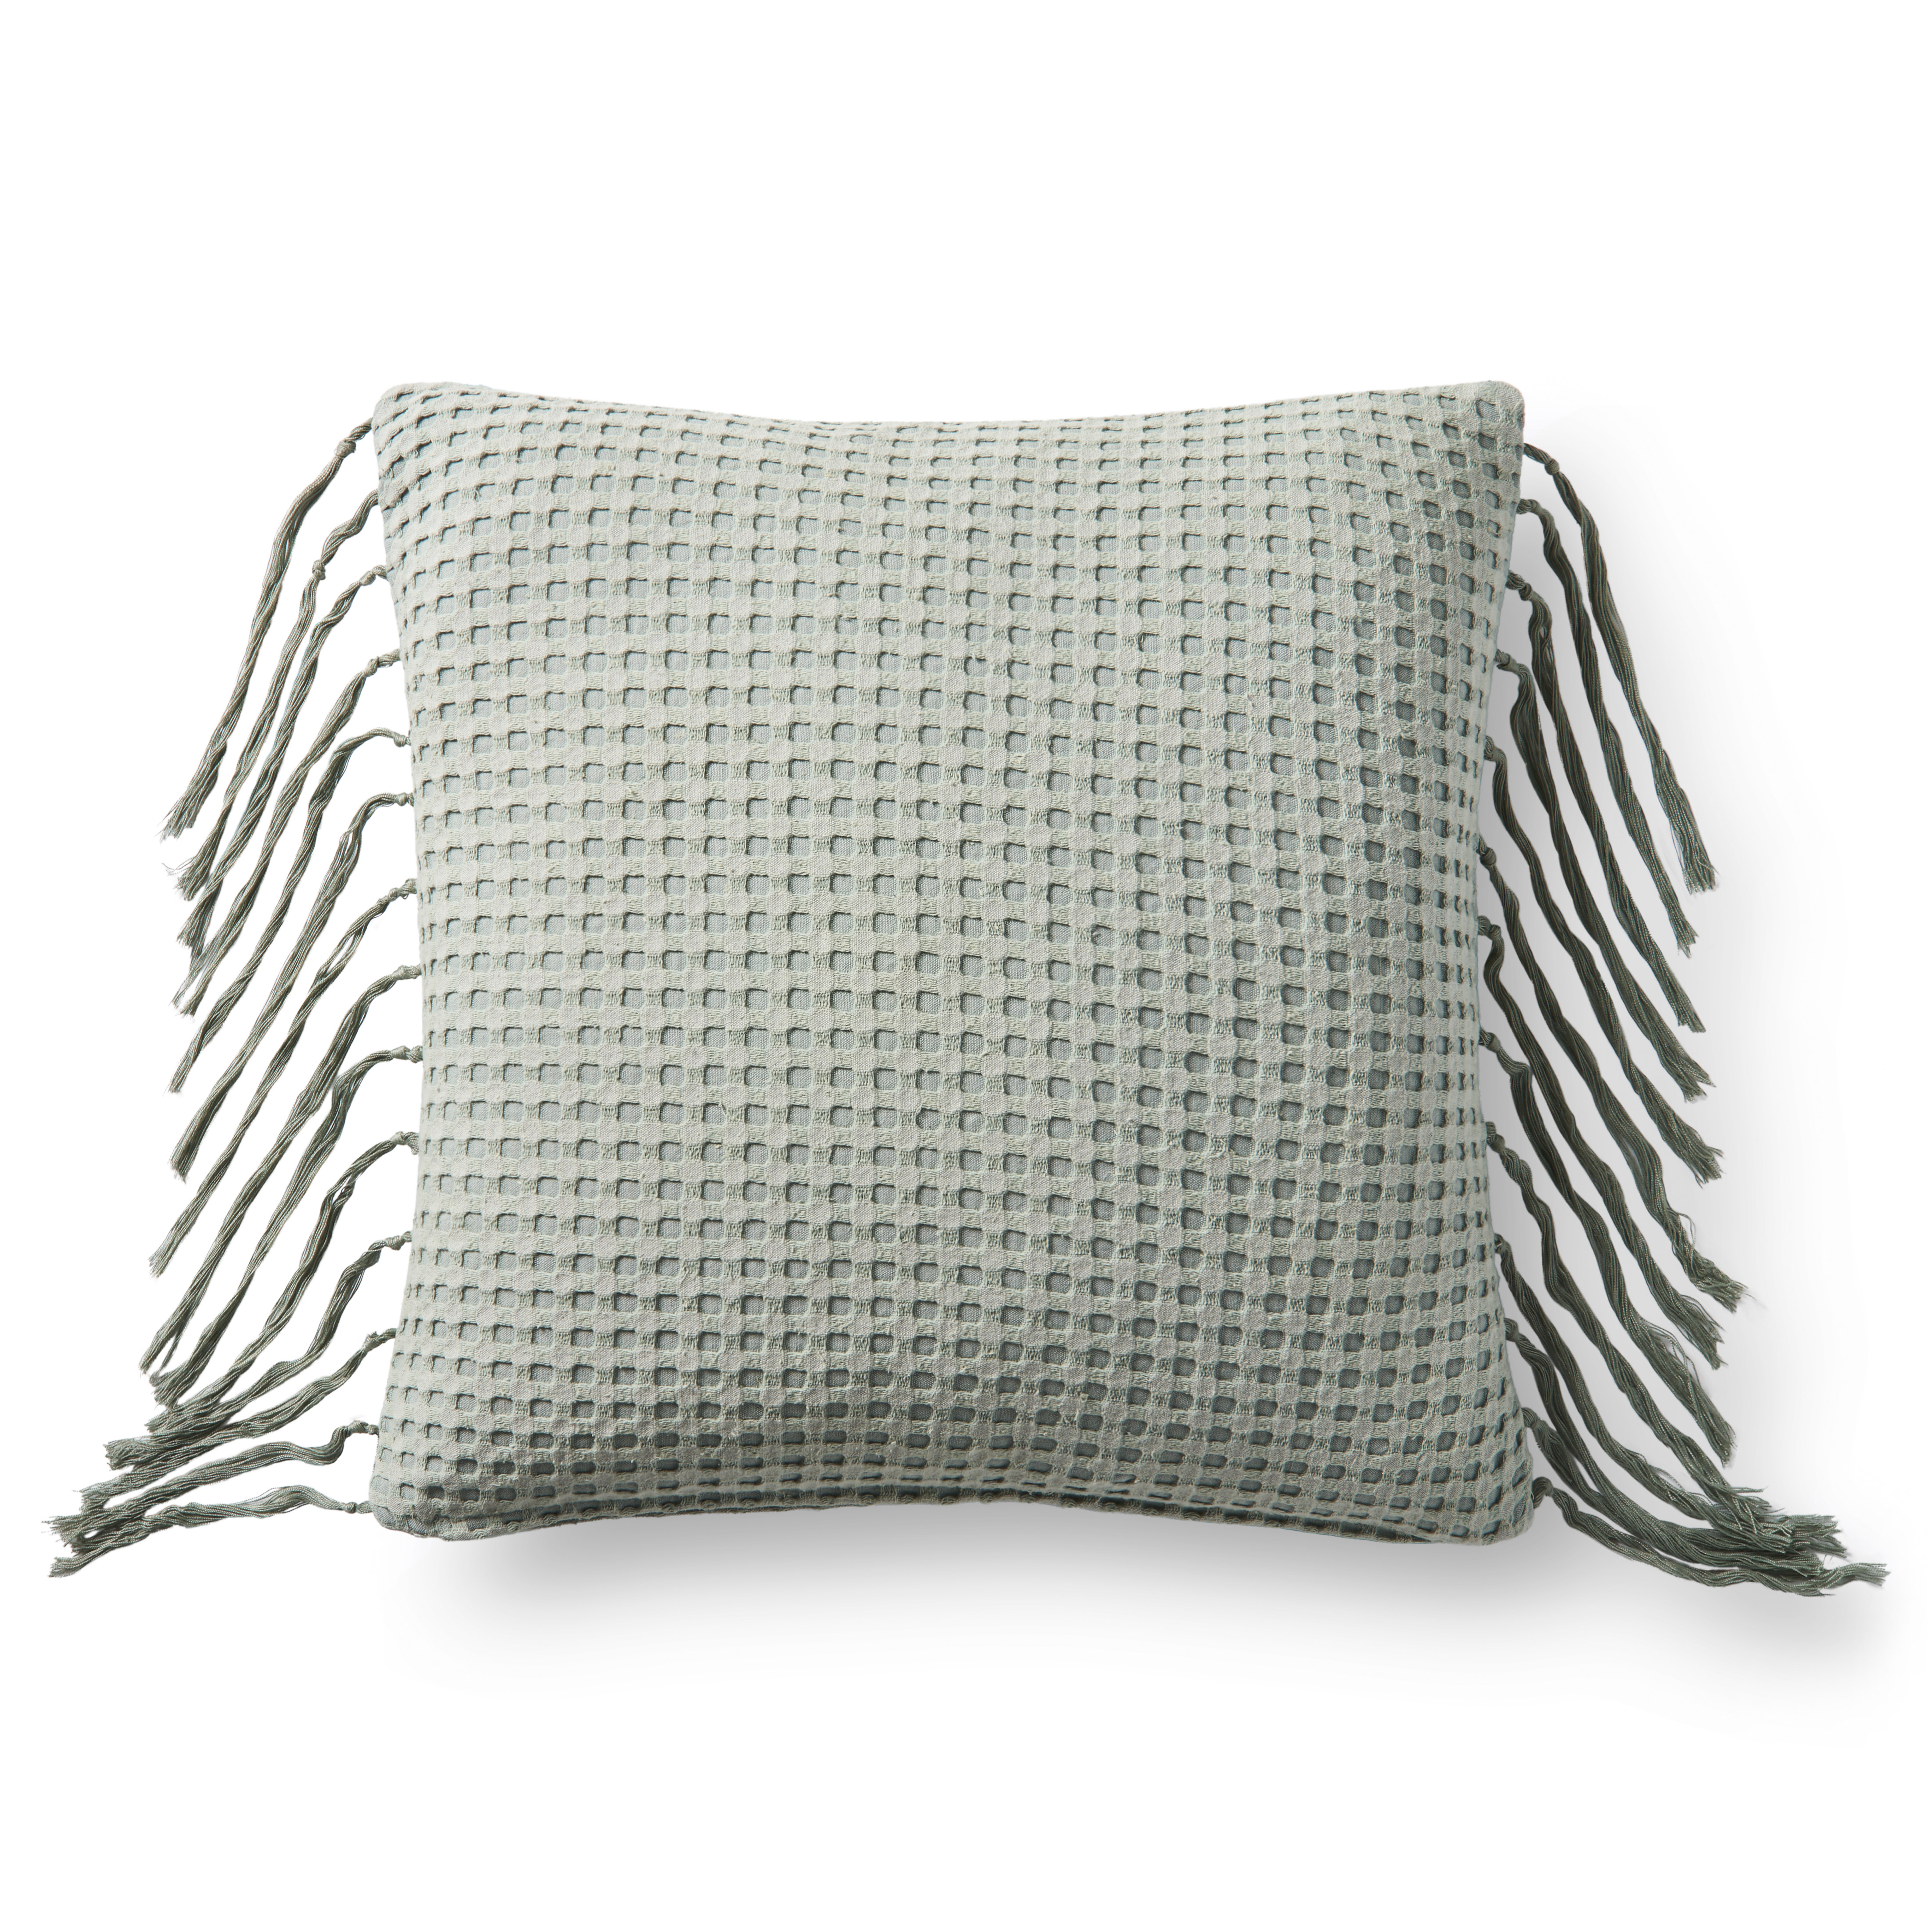 Loloi Pillows P0812 Sage 18" x 18" Cover Only - Loloi Rugs